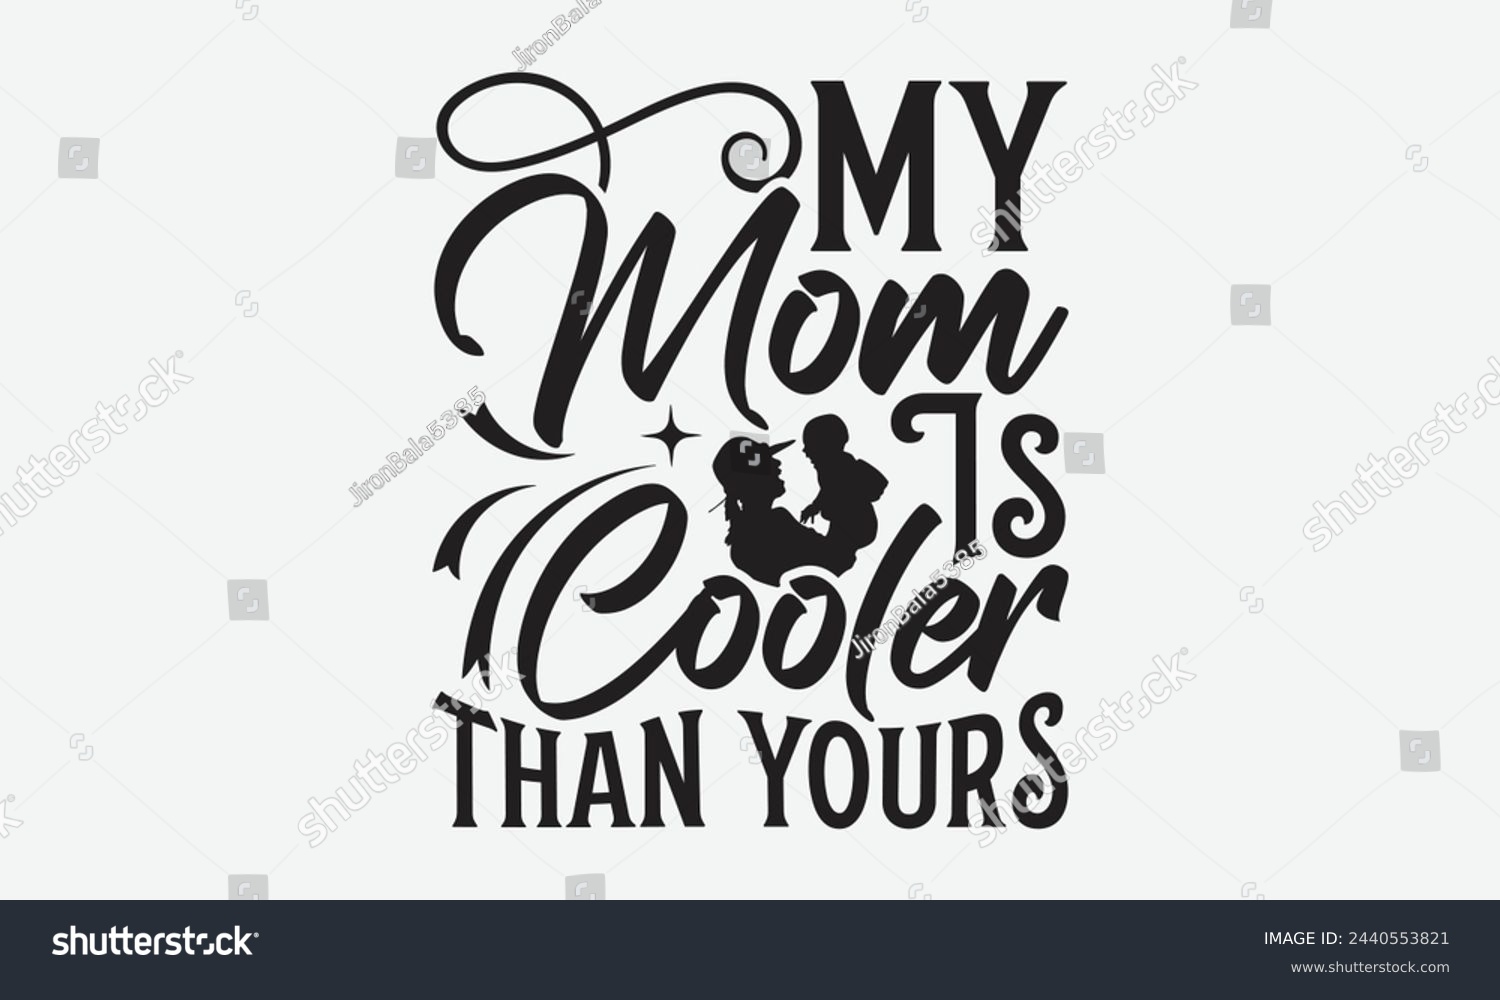 SVG of My Mom Is Cooler Than Yours - Mom t-shirt design, isolated on white background, this illustration can be used as a print on t-shirts and bags, cover book, template, stationary or as a poster.
 svg